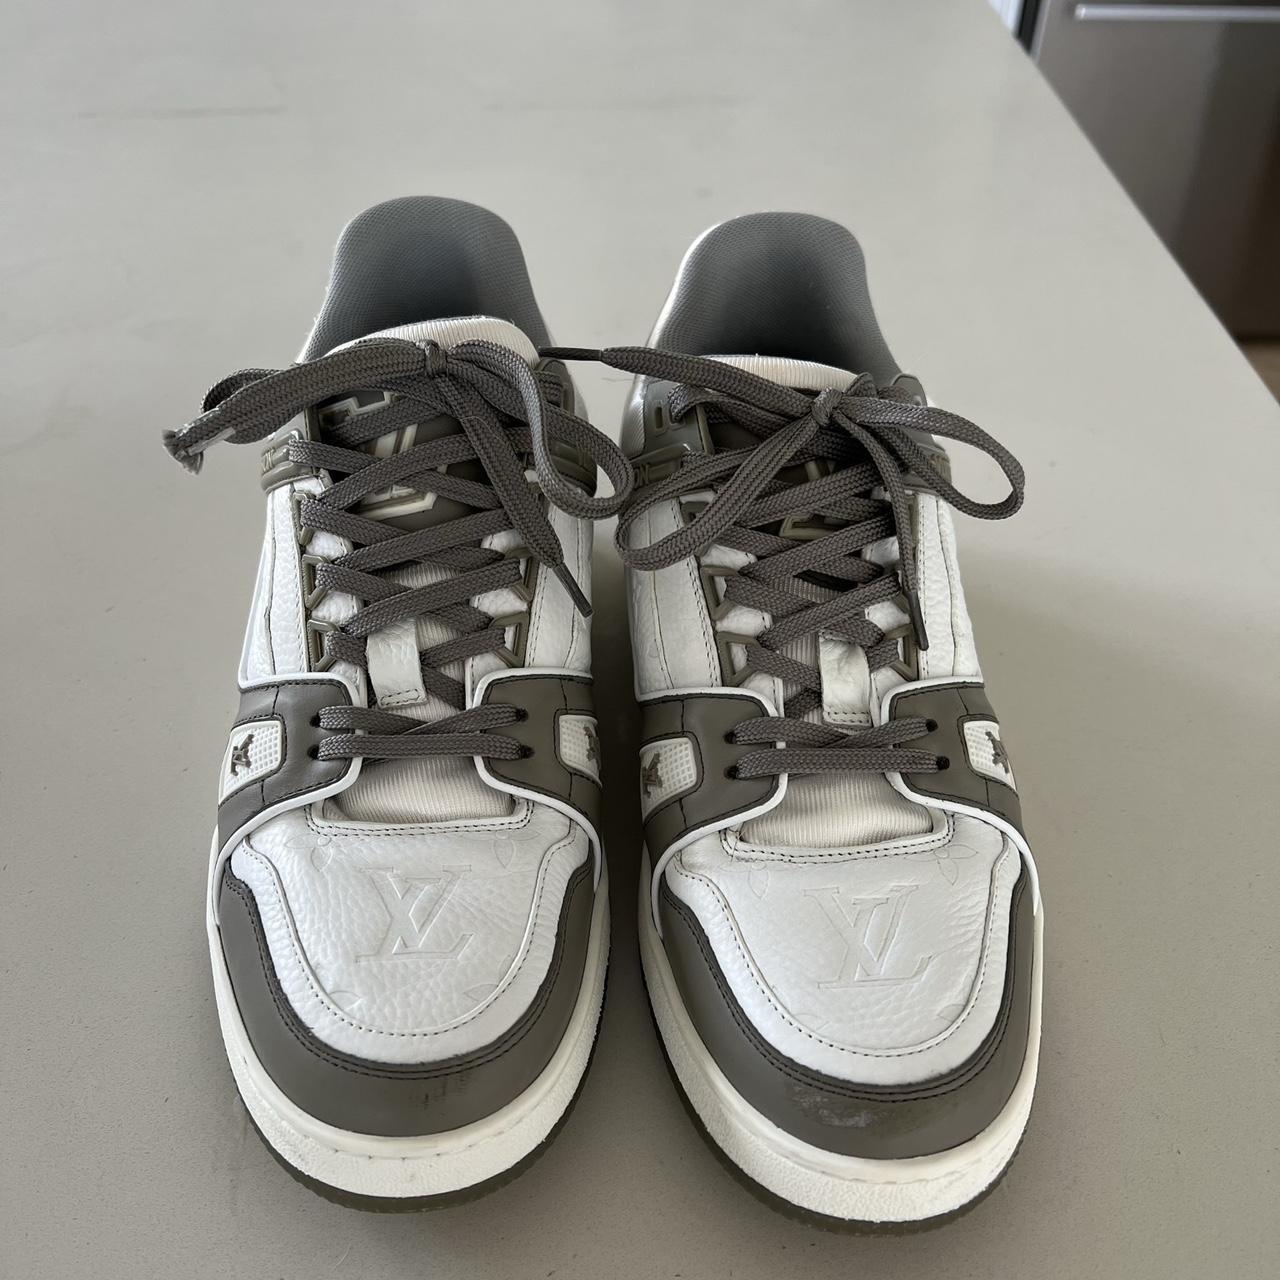 LV Sneakers - good condition, got them as a gift!... - Depop